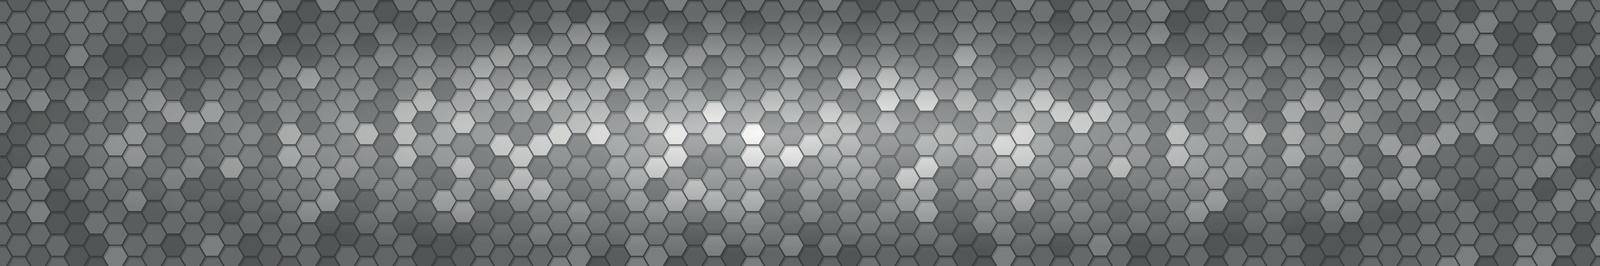 Abstract background with many small hexagons